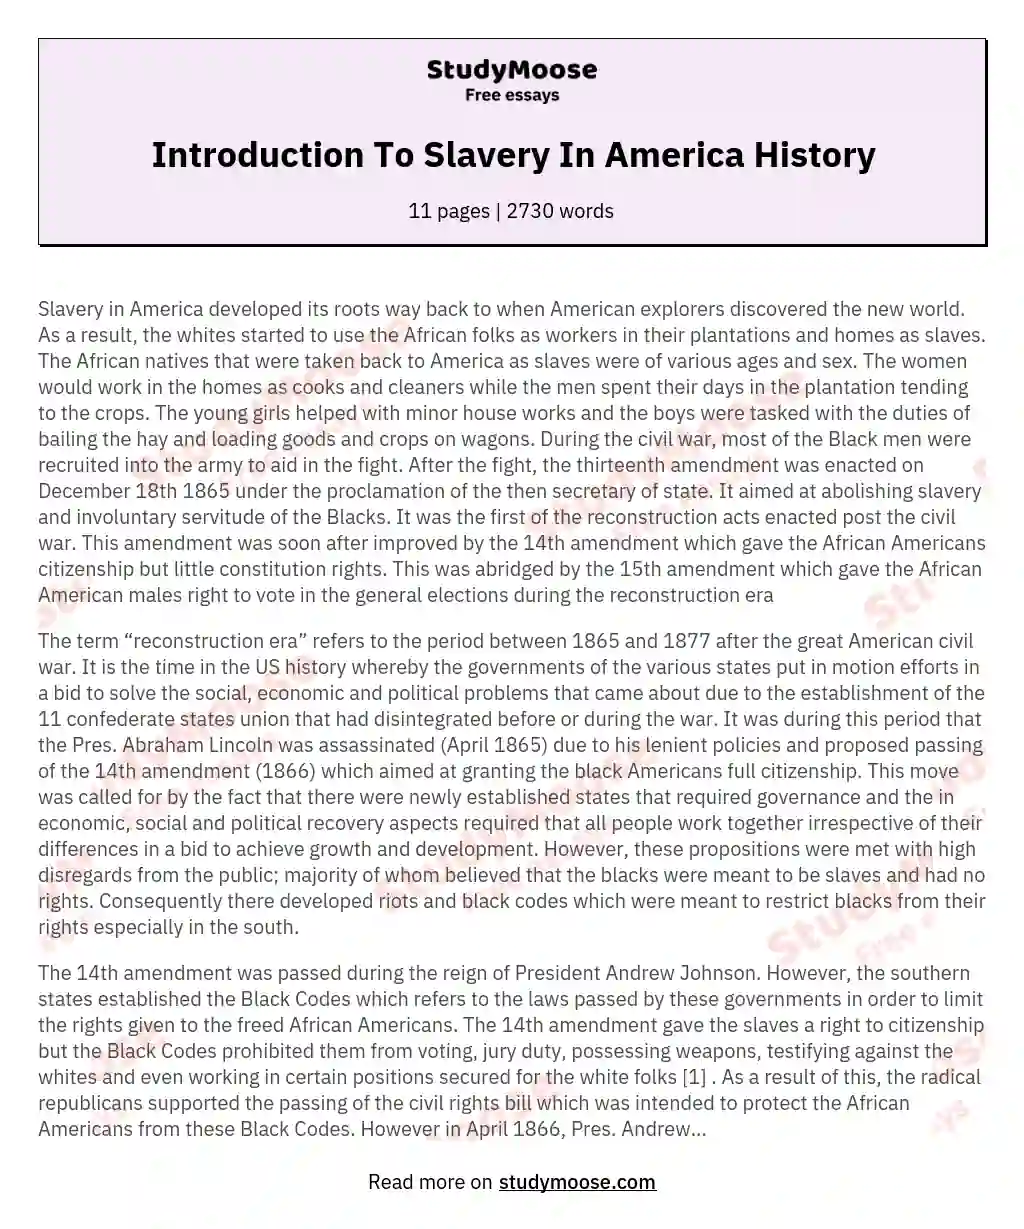 Introduction To Slavery In America History